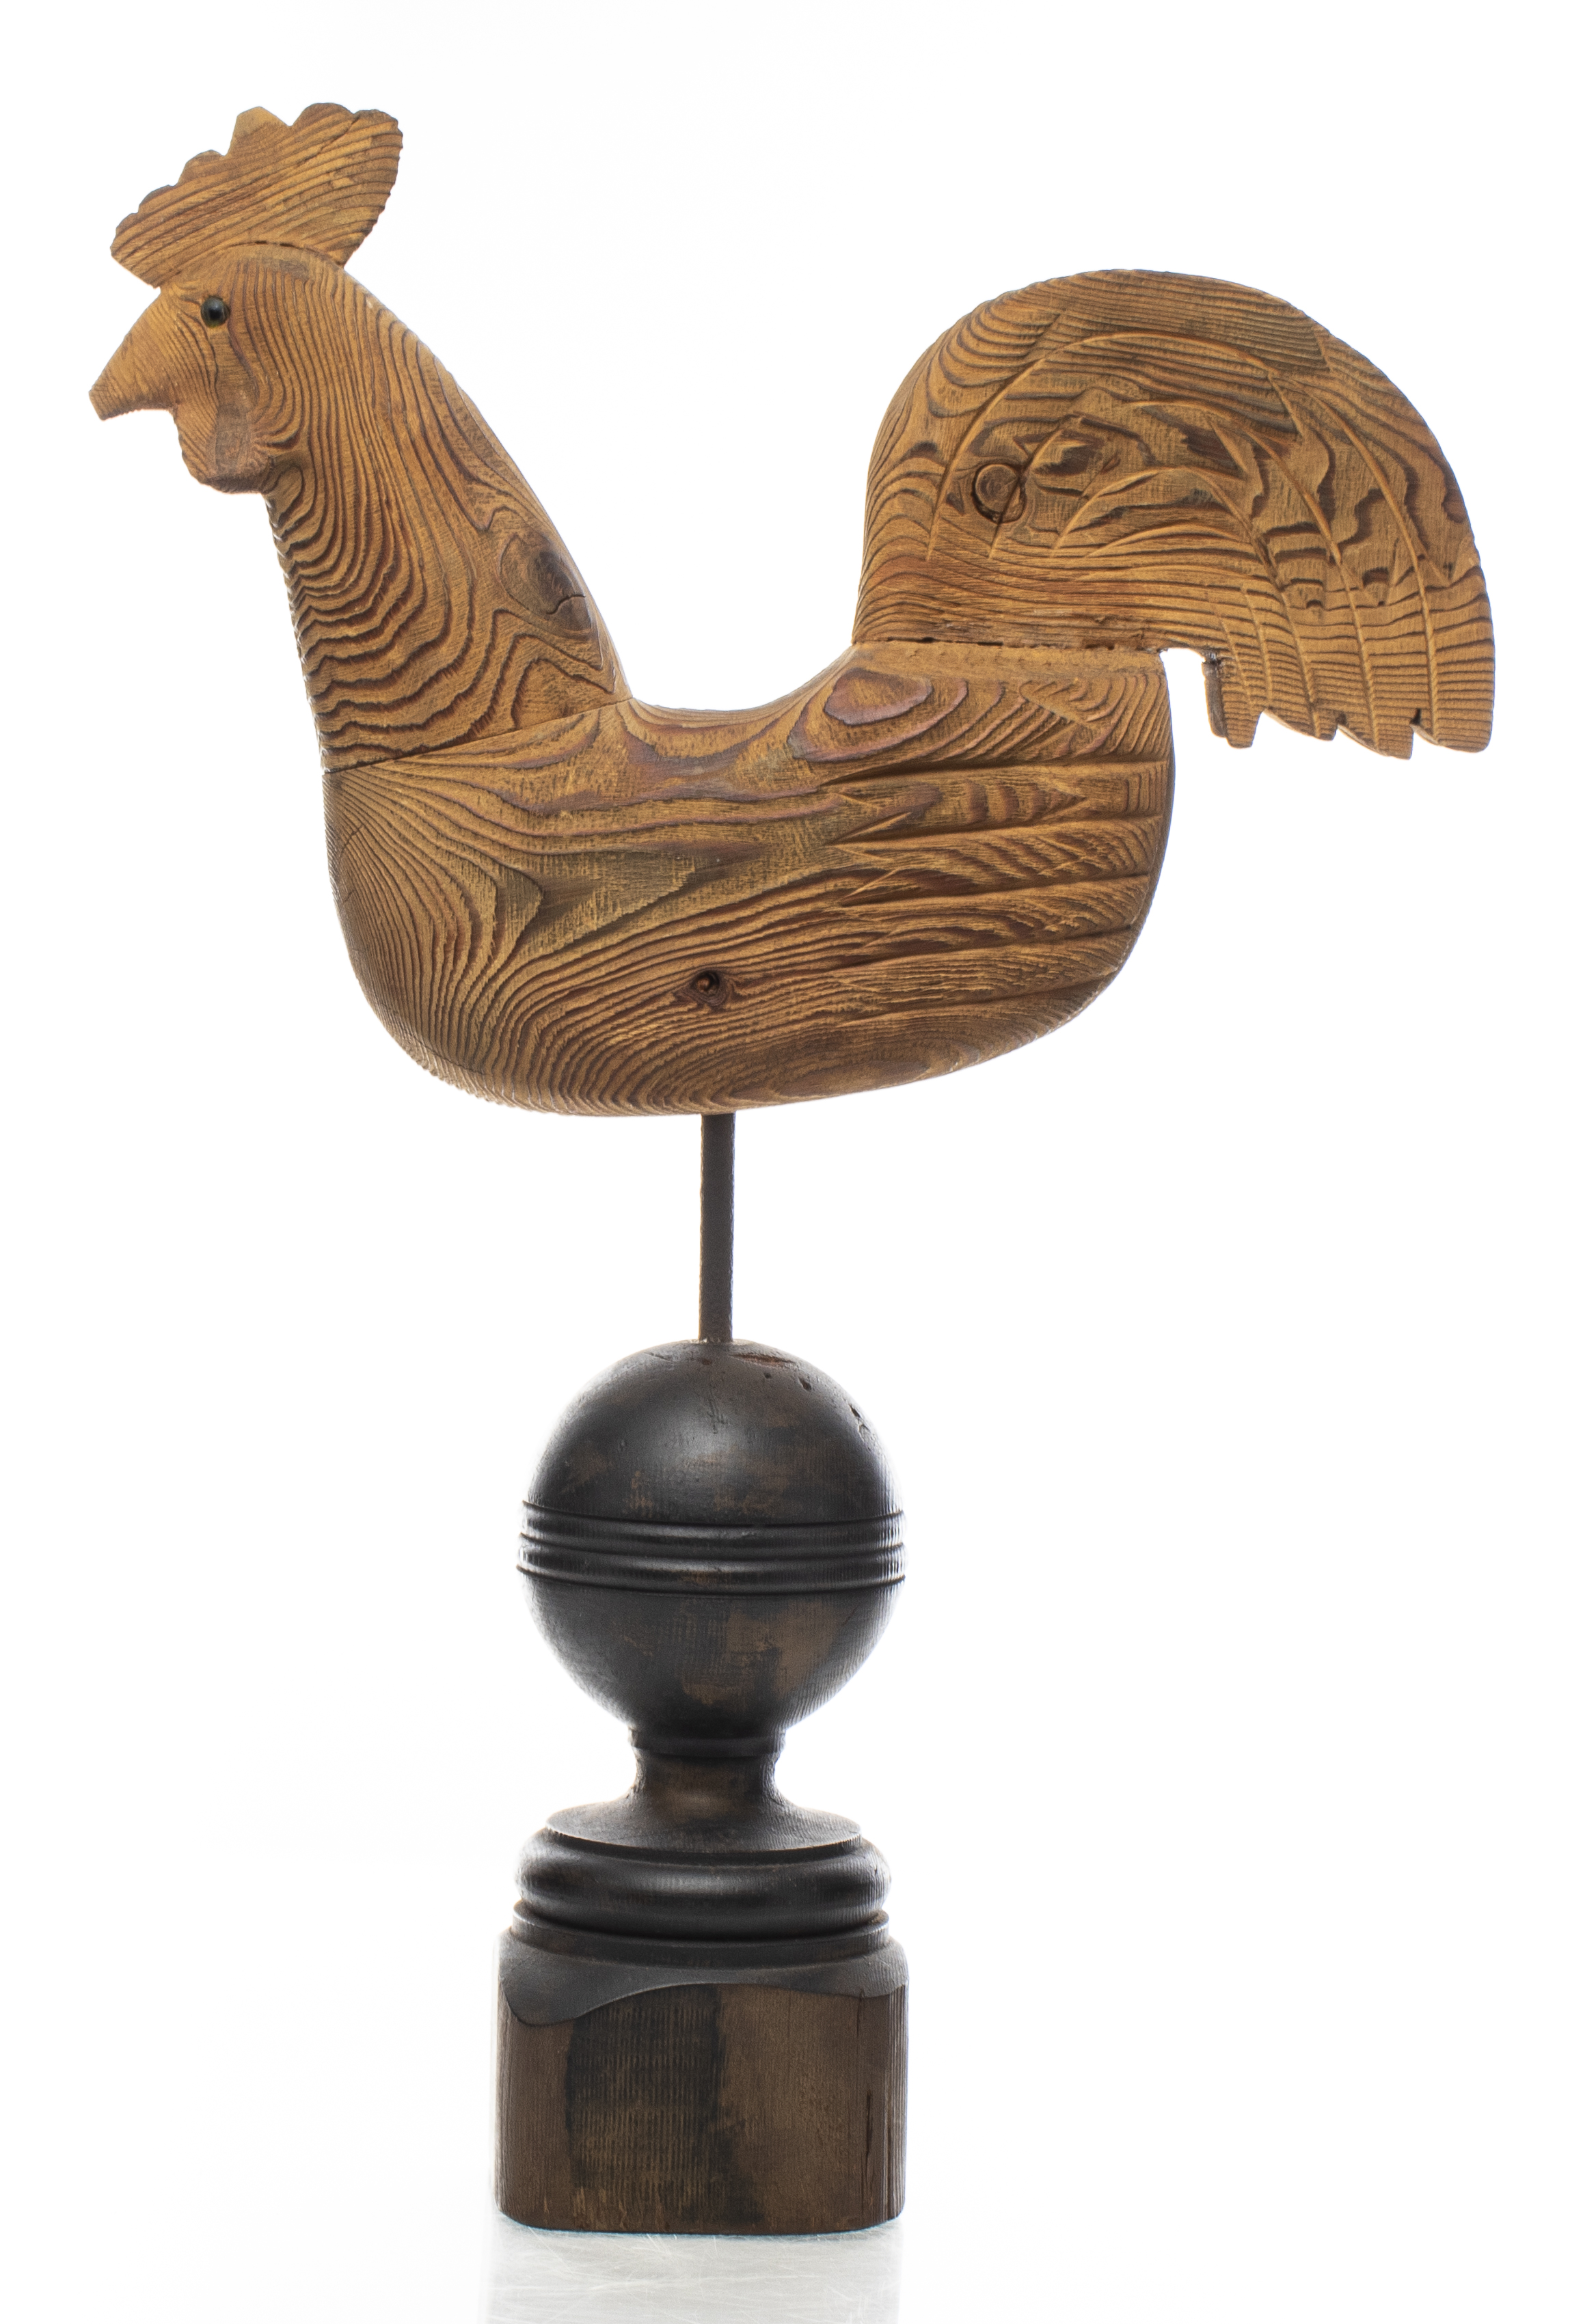 AMERICAN FOLK ART CARVED WOOD ROOSTER 3c4f8e